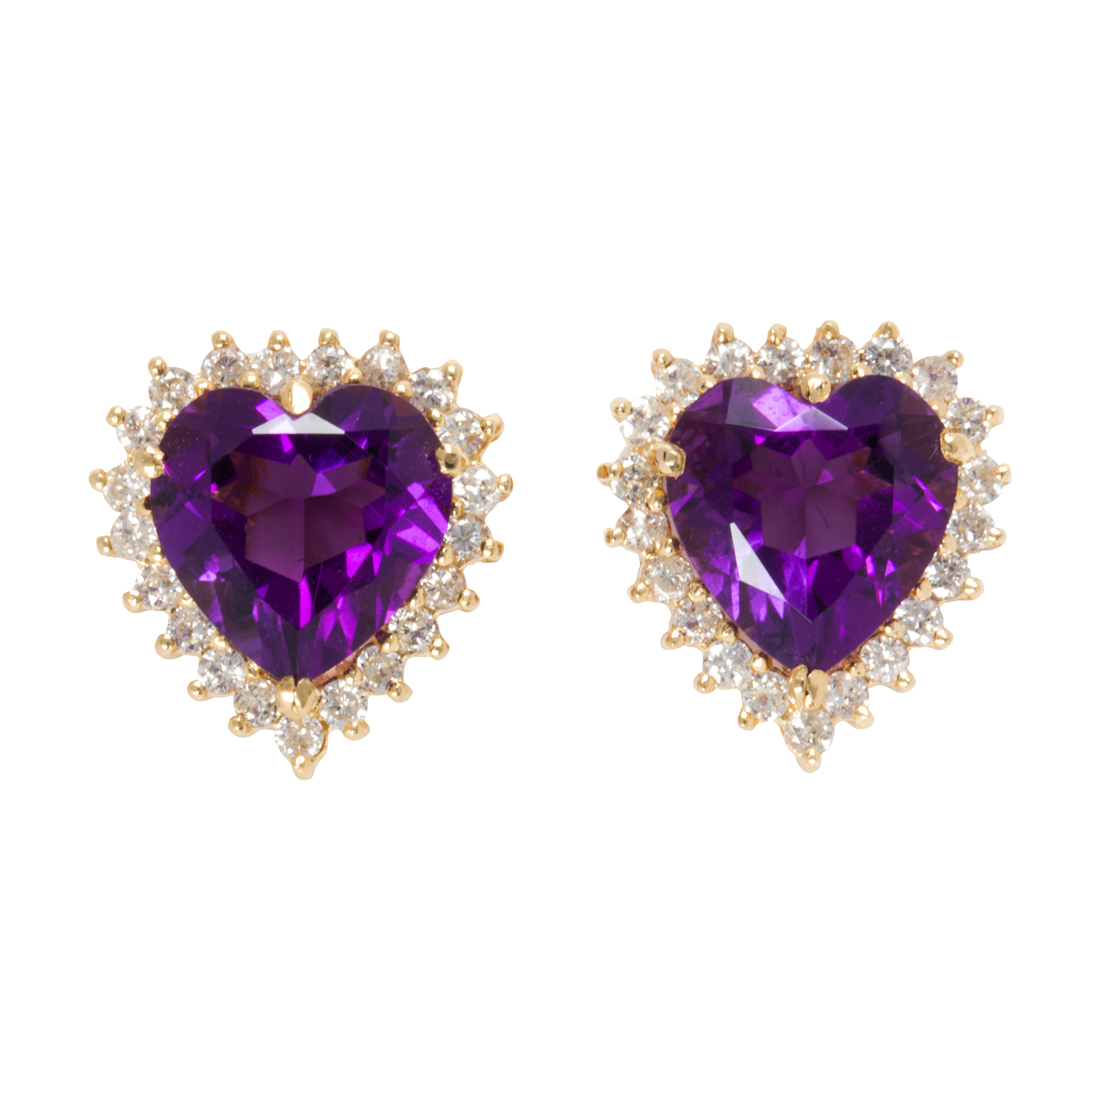 A PAIR OF AMETHYST, DIAMOND AND